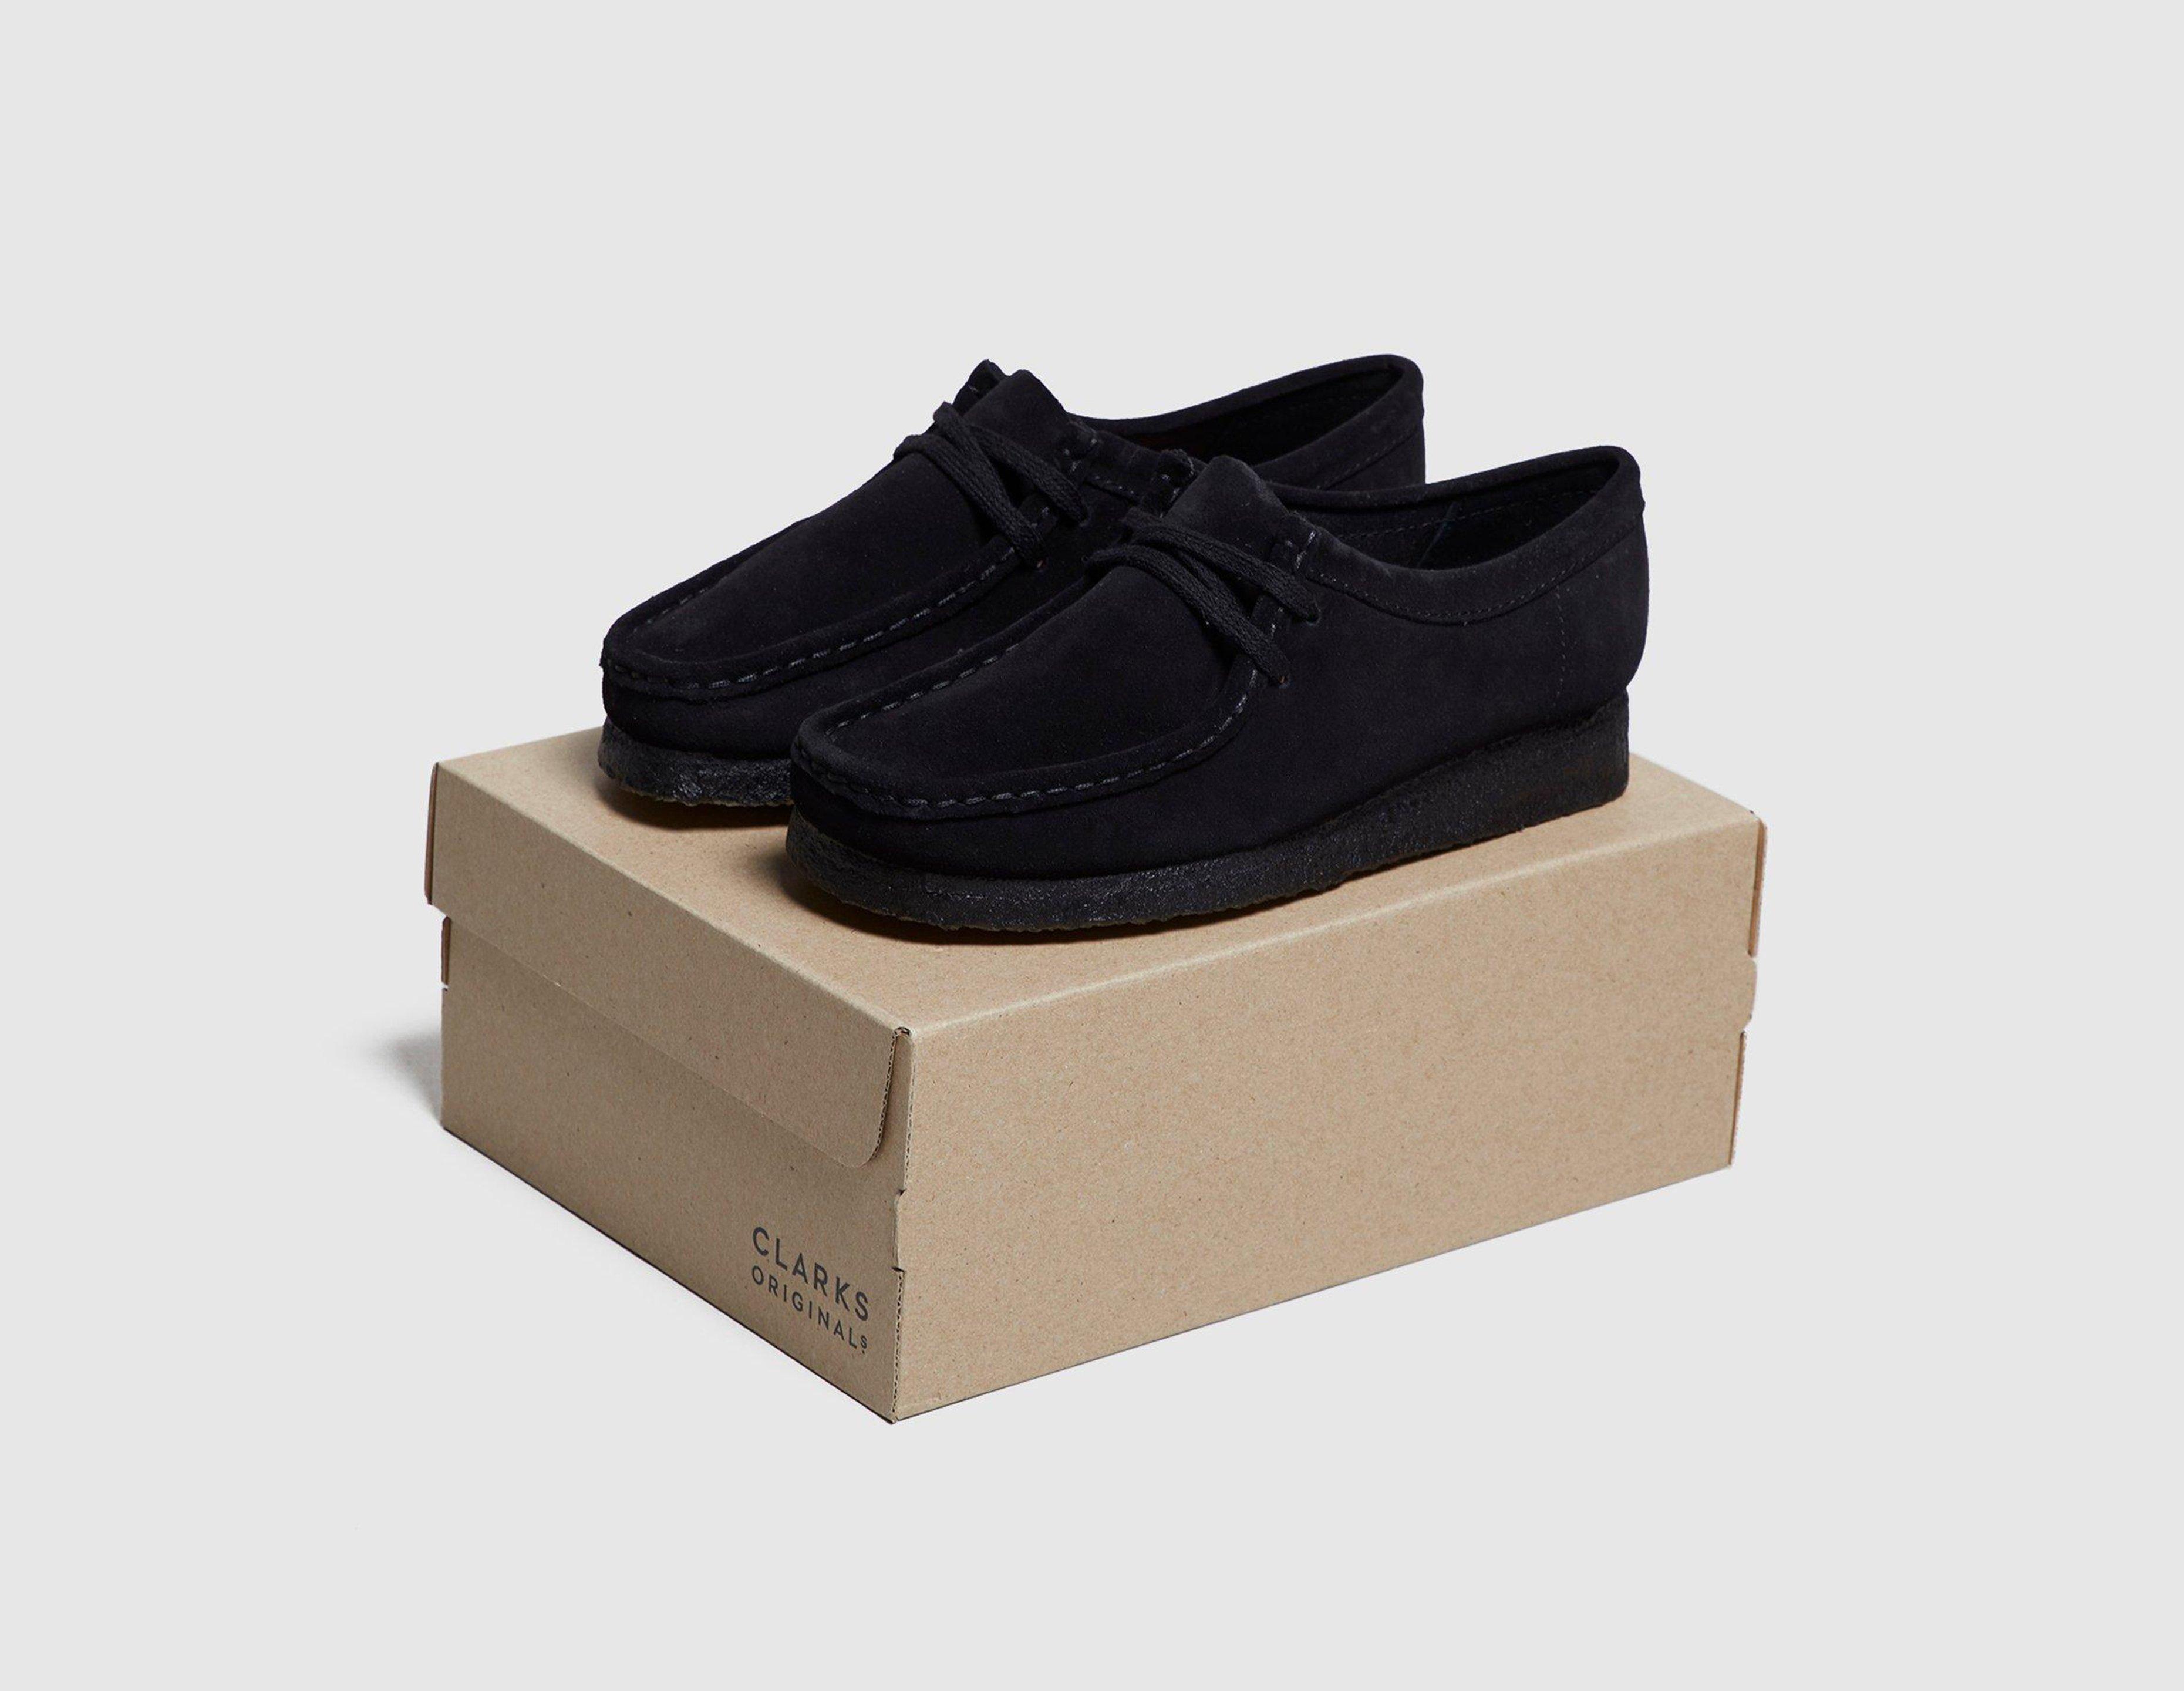 wallabees womens